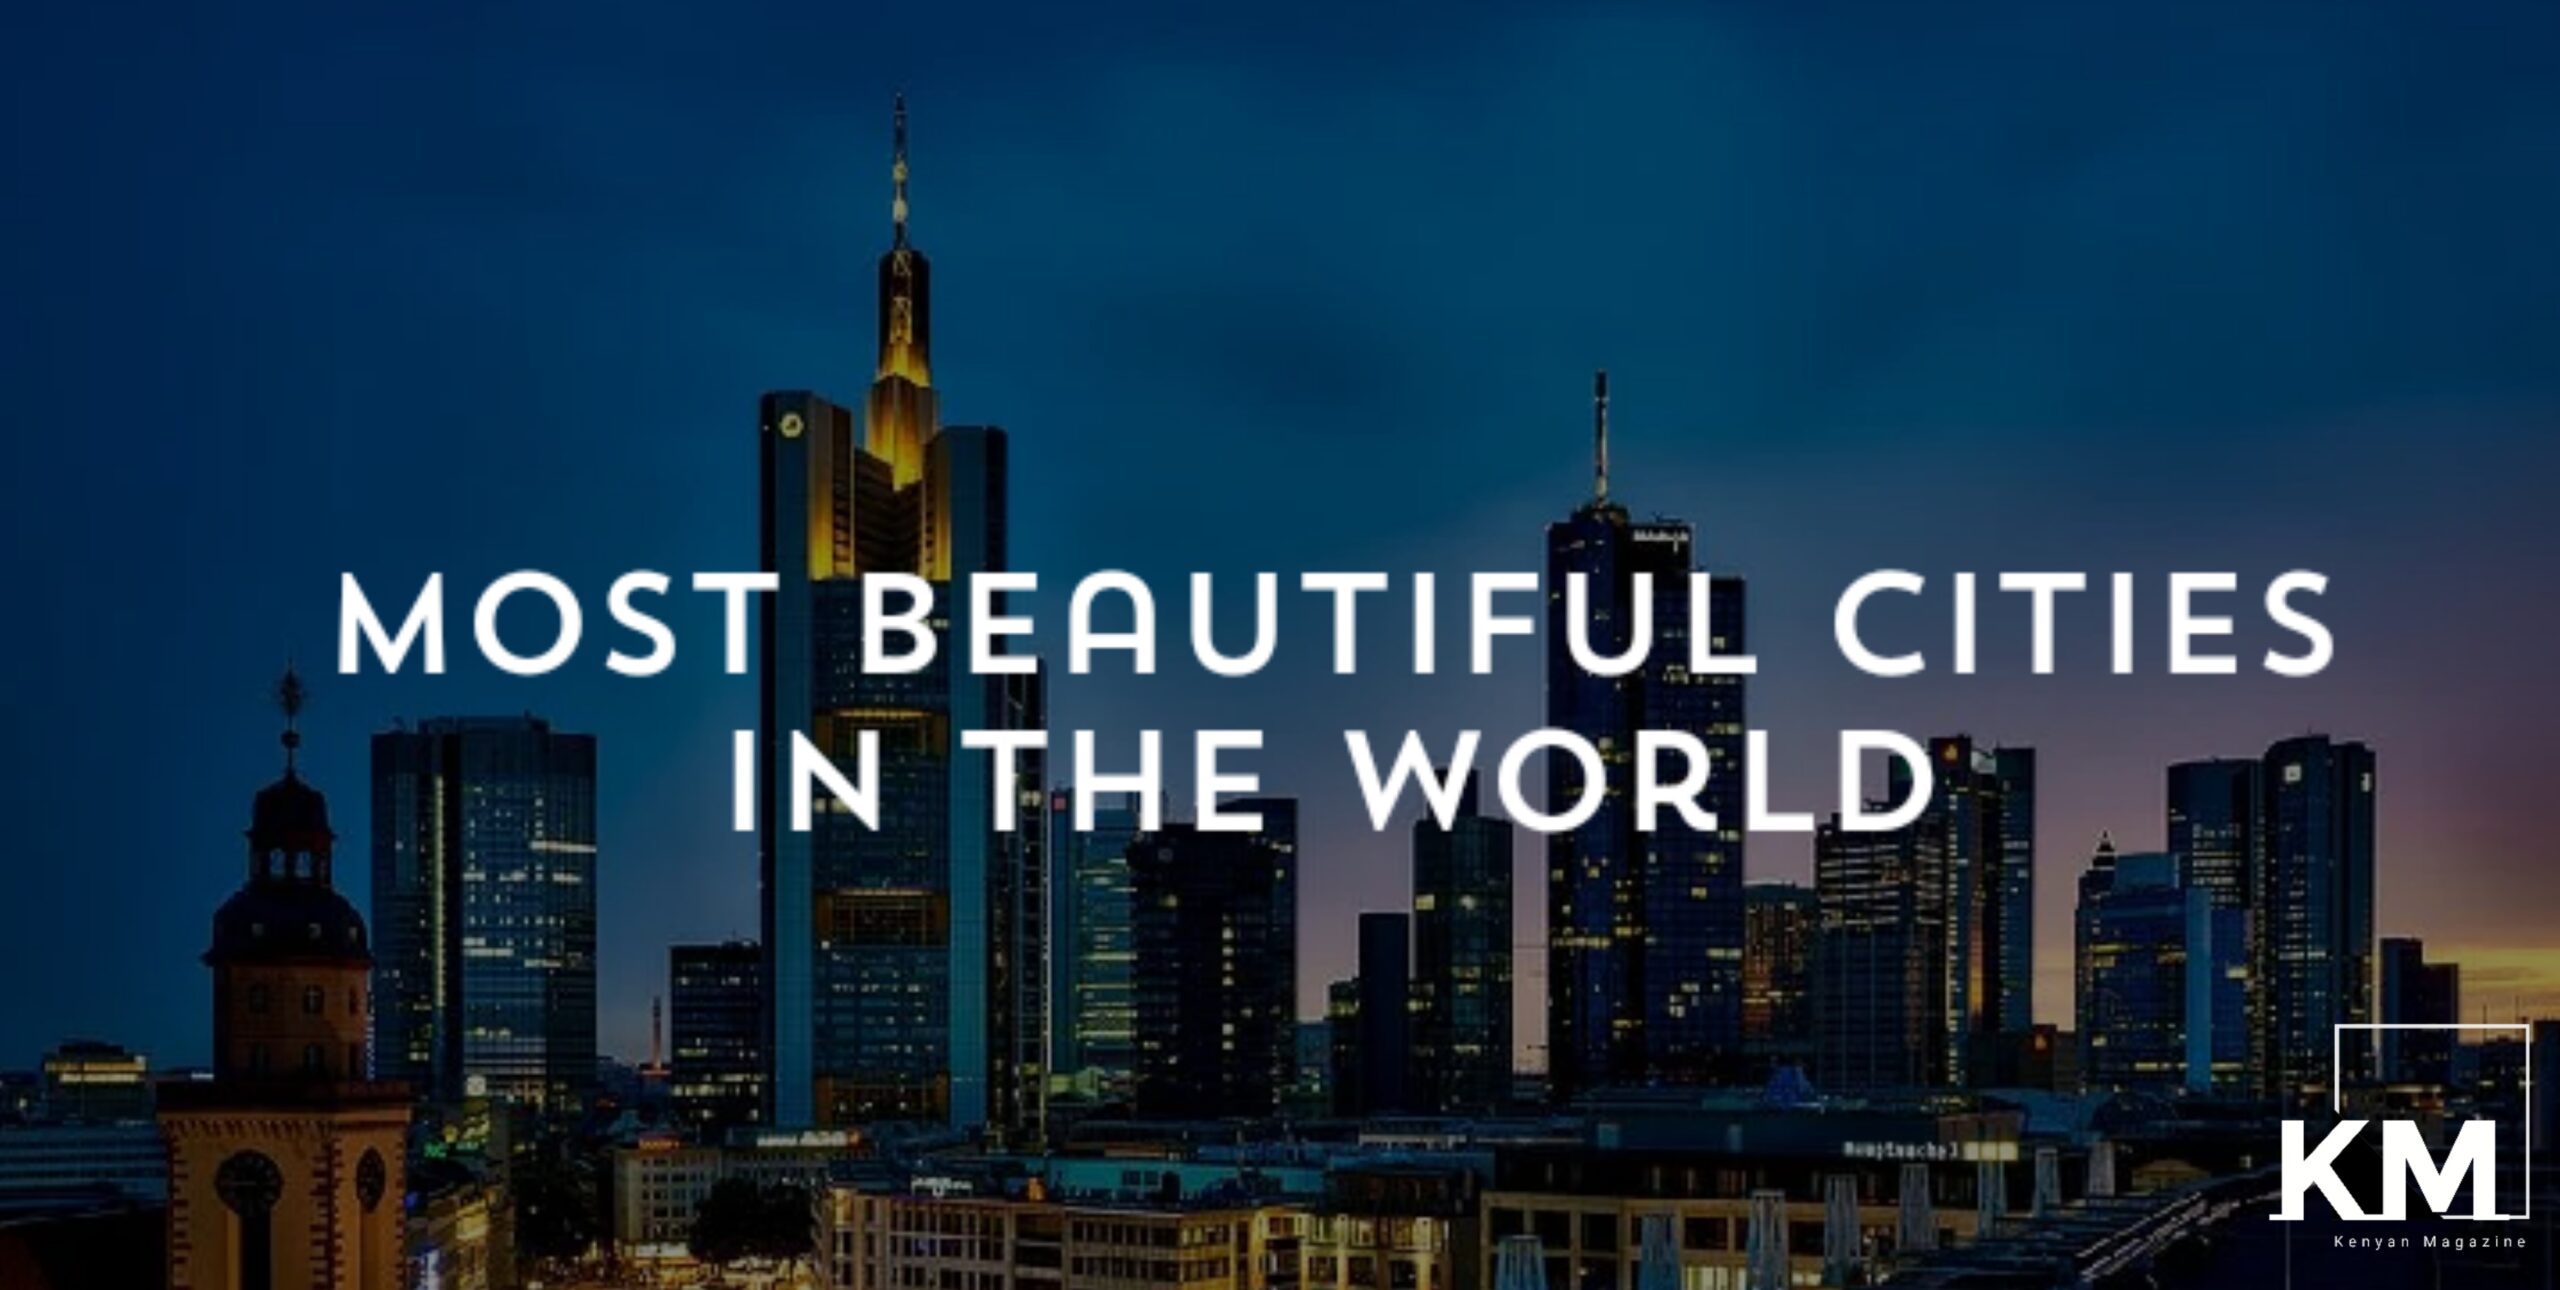 Most beautiful cities in the world